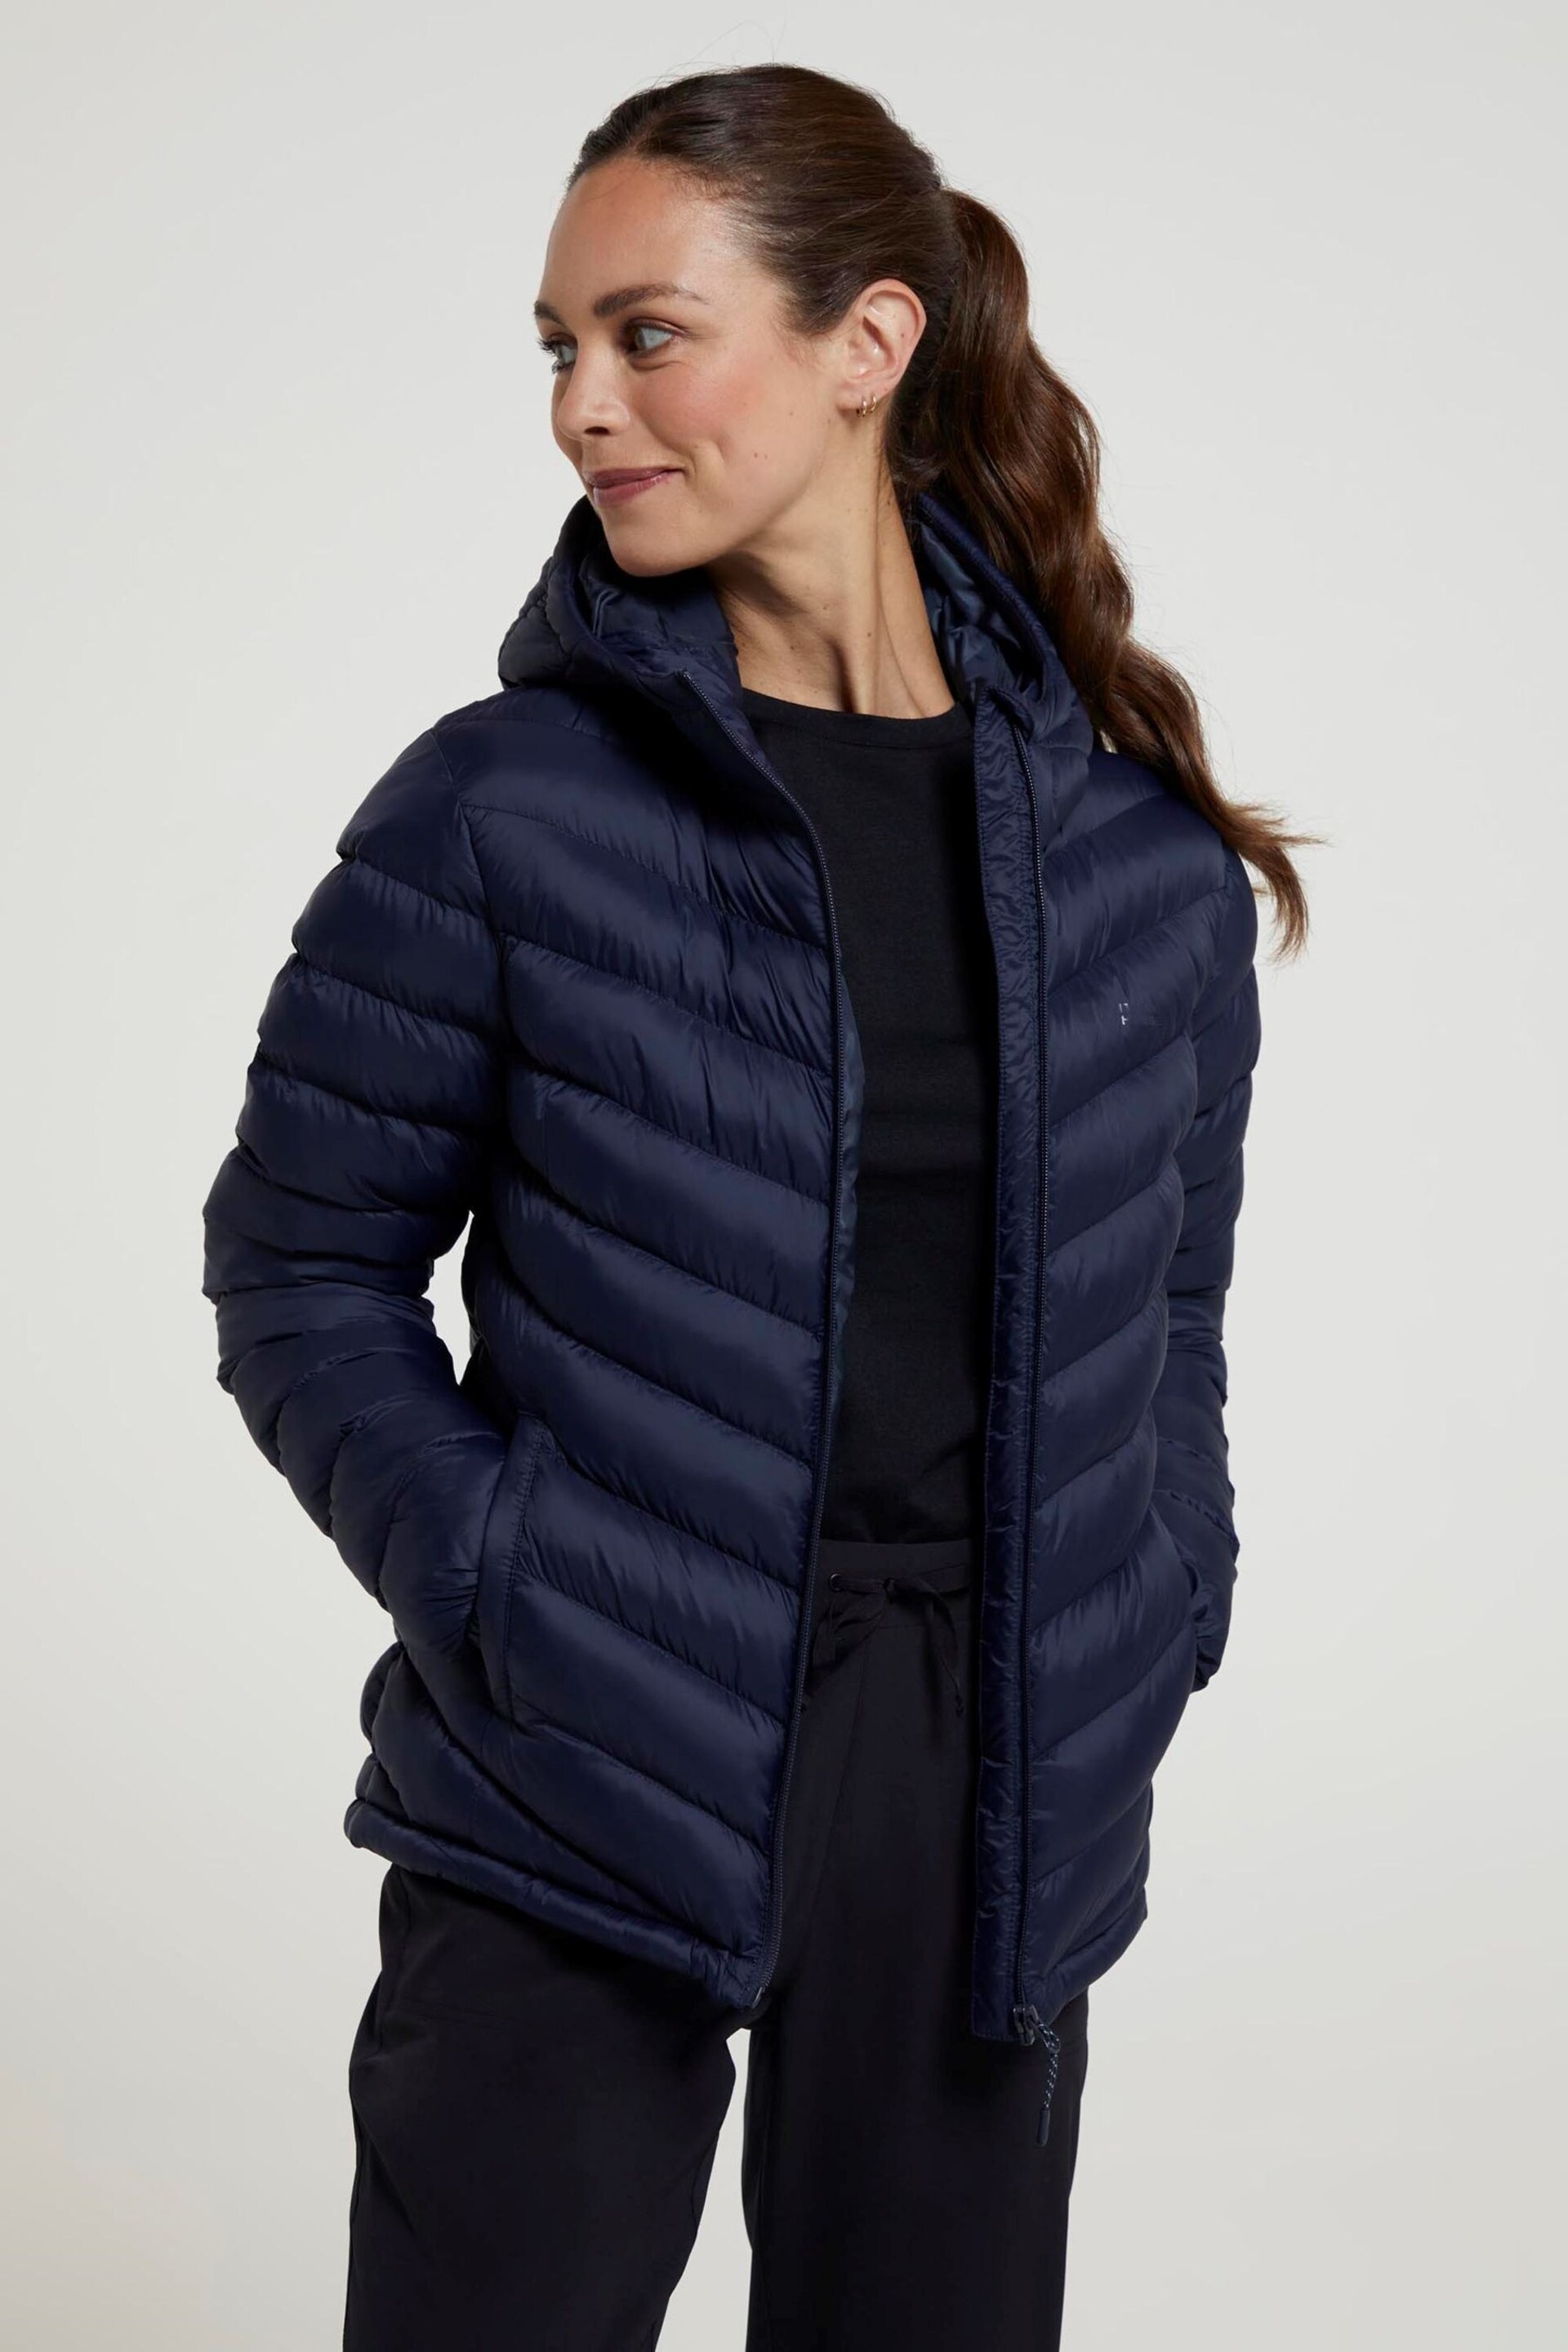 Mountain Warehouse Blue Womens Seasons Water Resistant Padded Jacket - Image 4 of 9